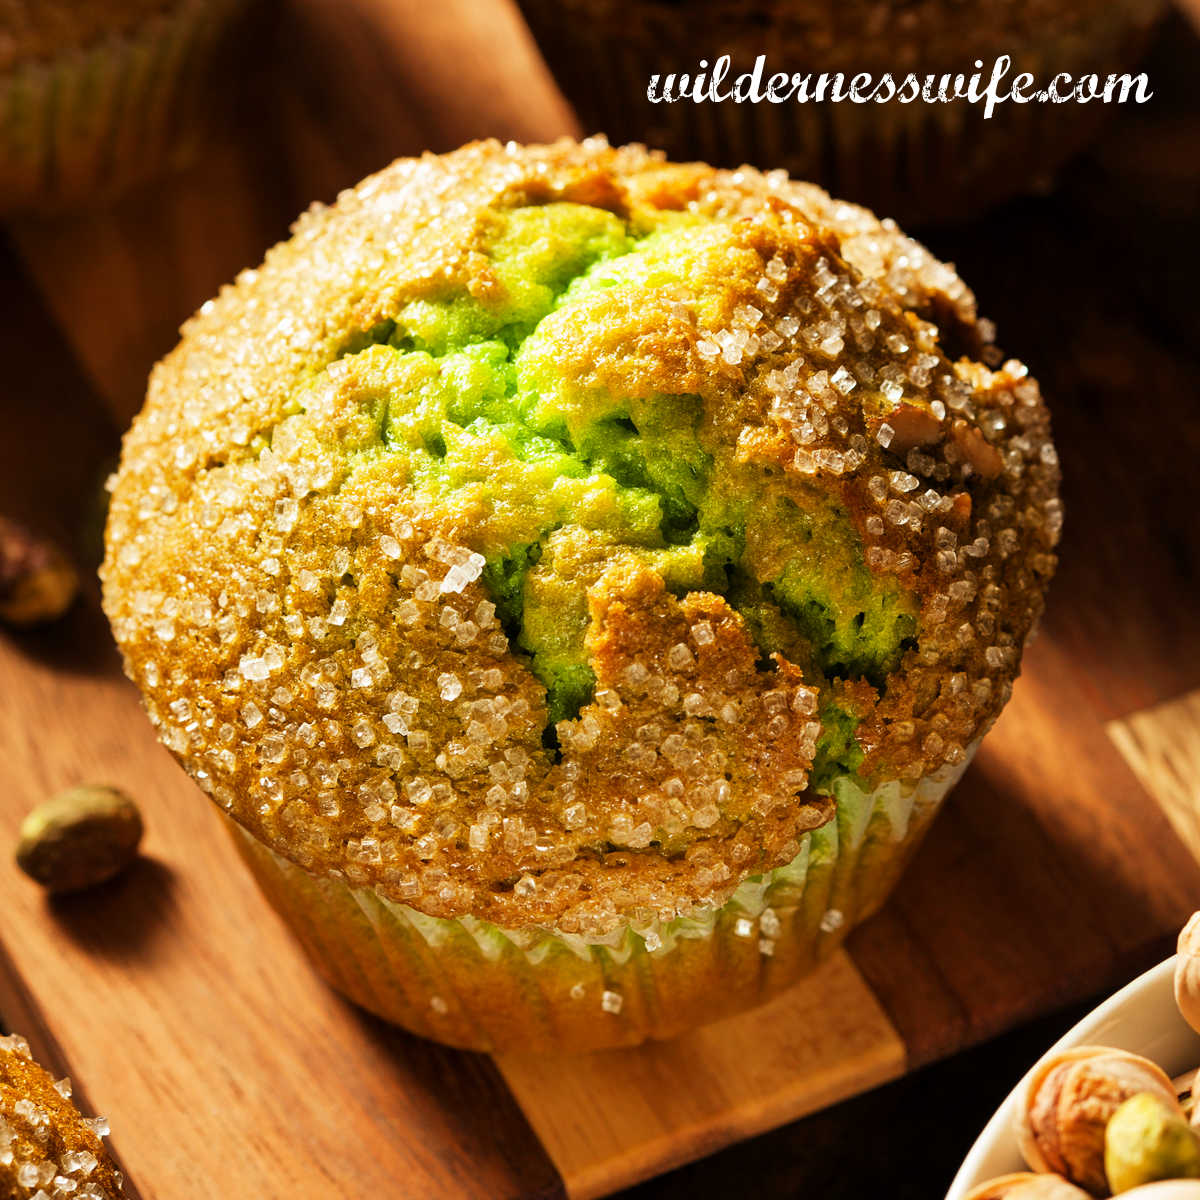 Pistachio muffin on wooden cutting board